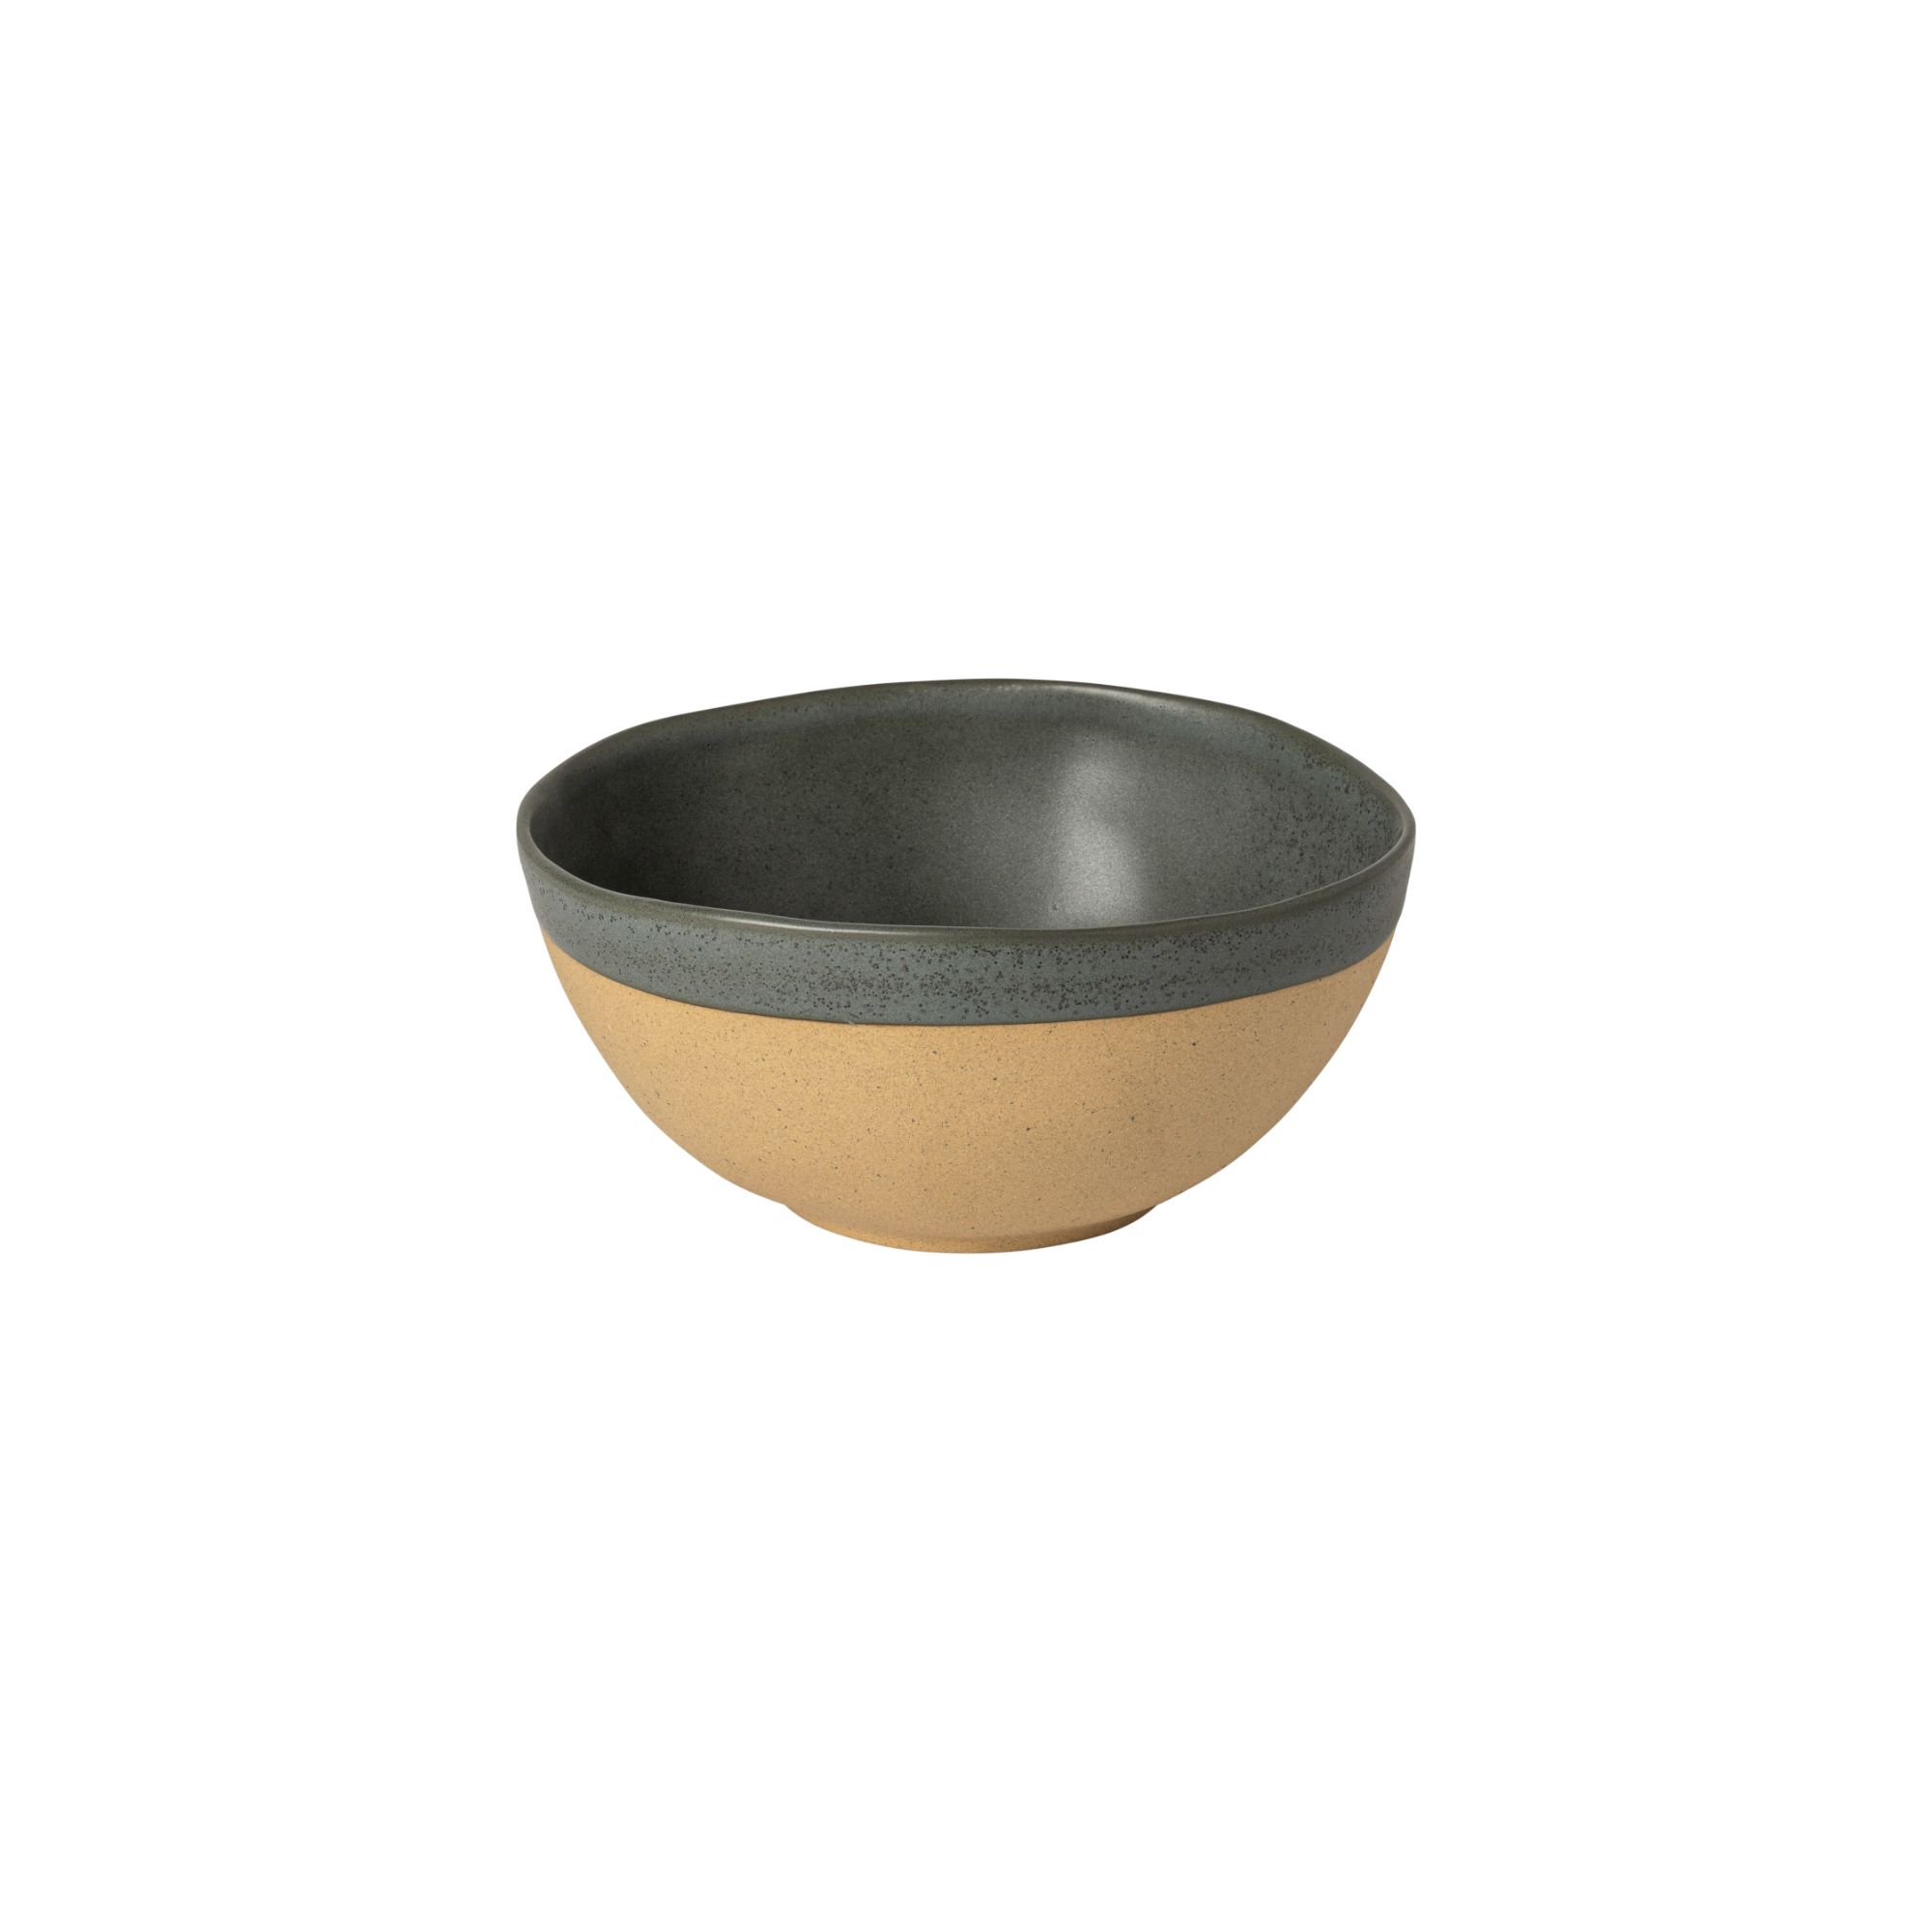 Arenito Charcoal Grey Latte Bowl 16cm Gift